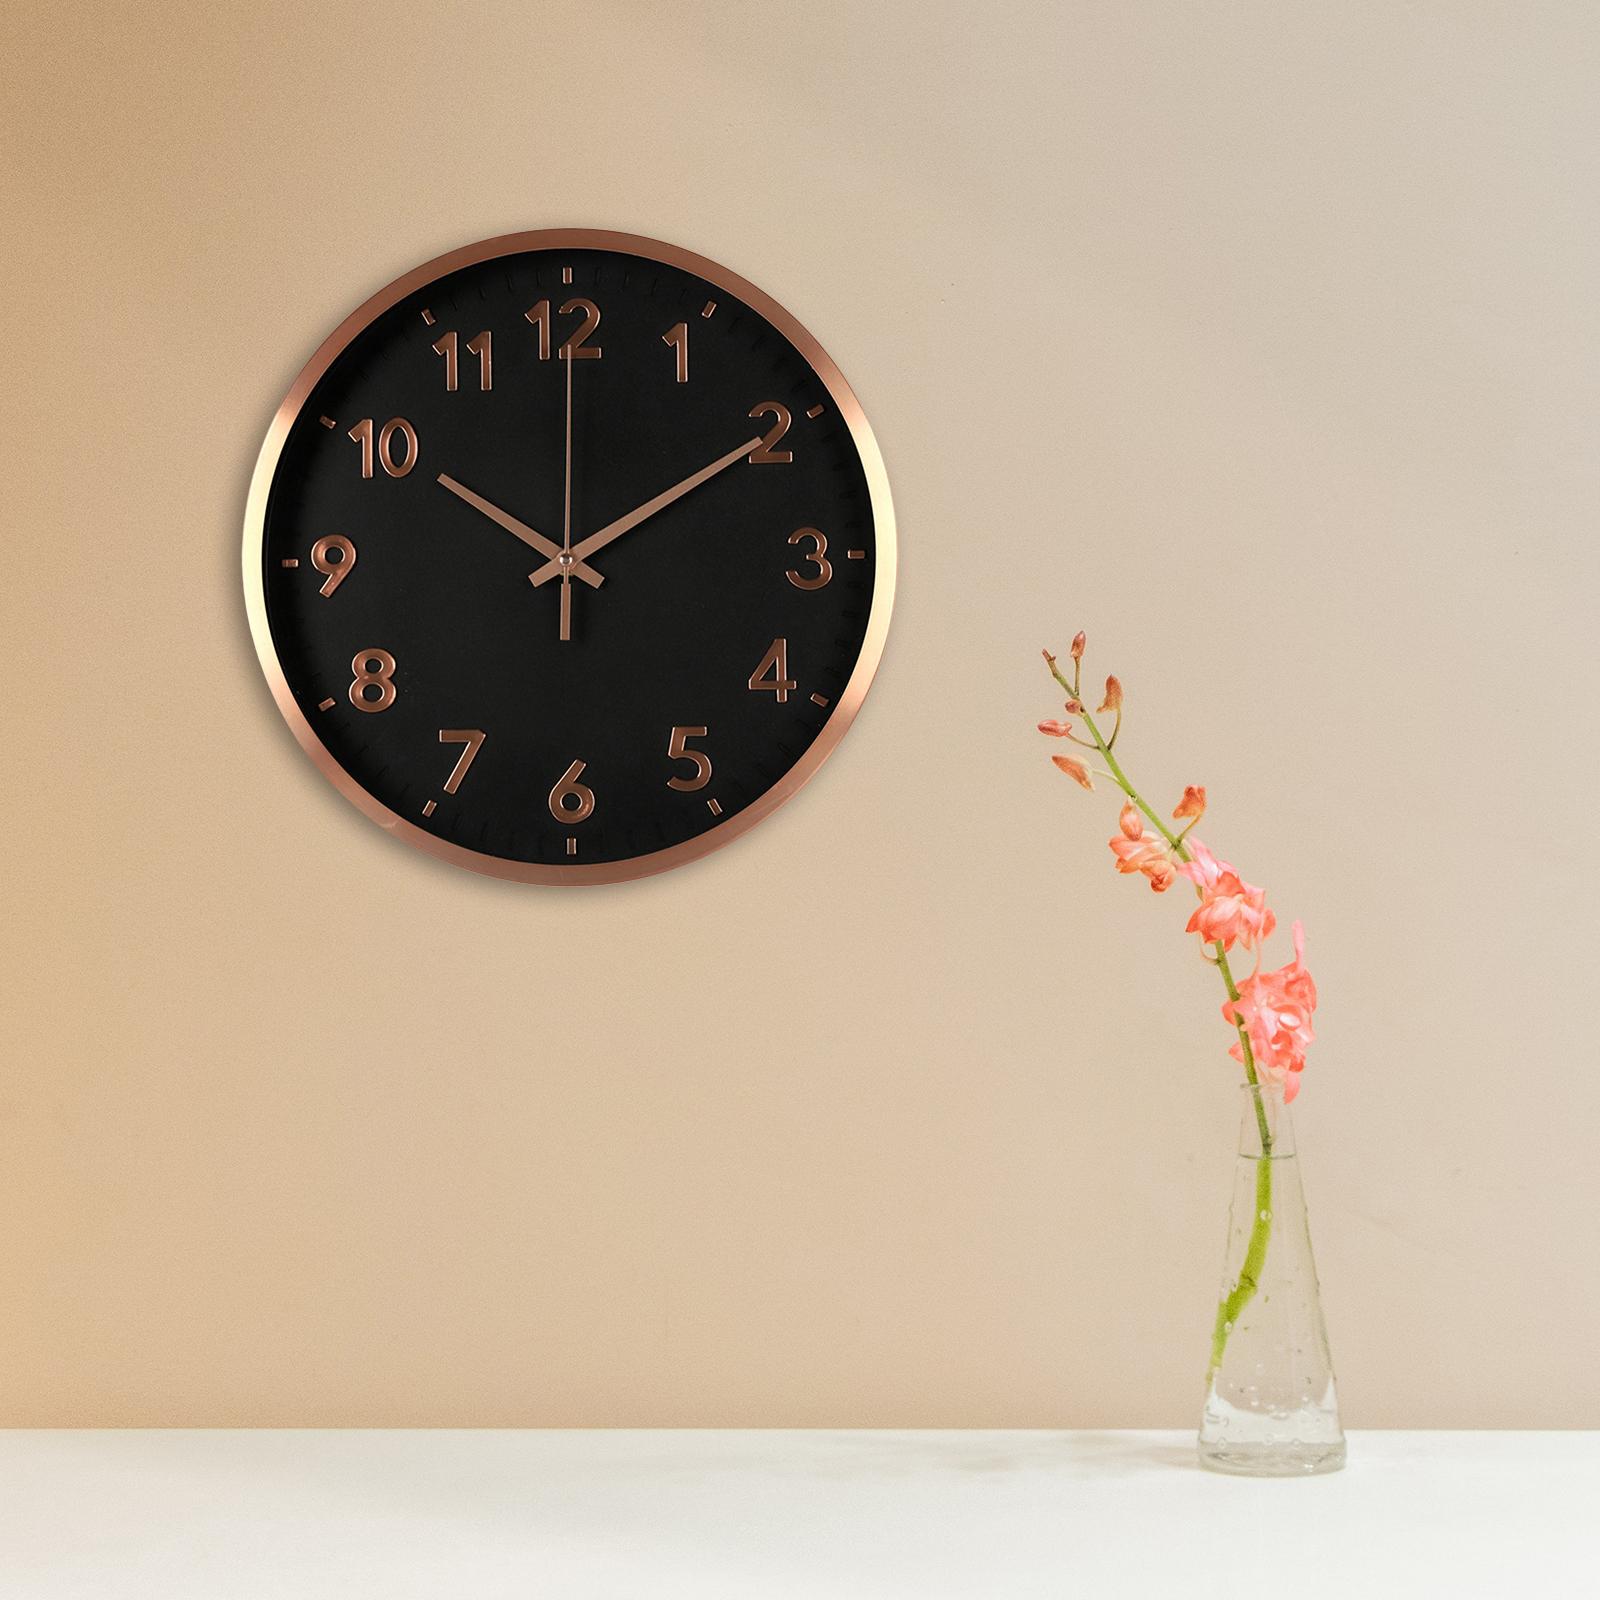 12 inch Wall Clock Non Ticking Decor Silent Hanging Clocks for Dining Room Rose Gold Black